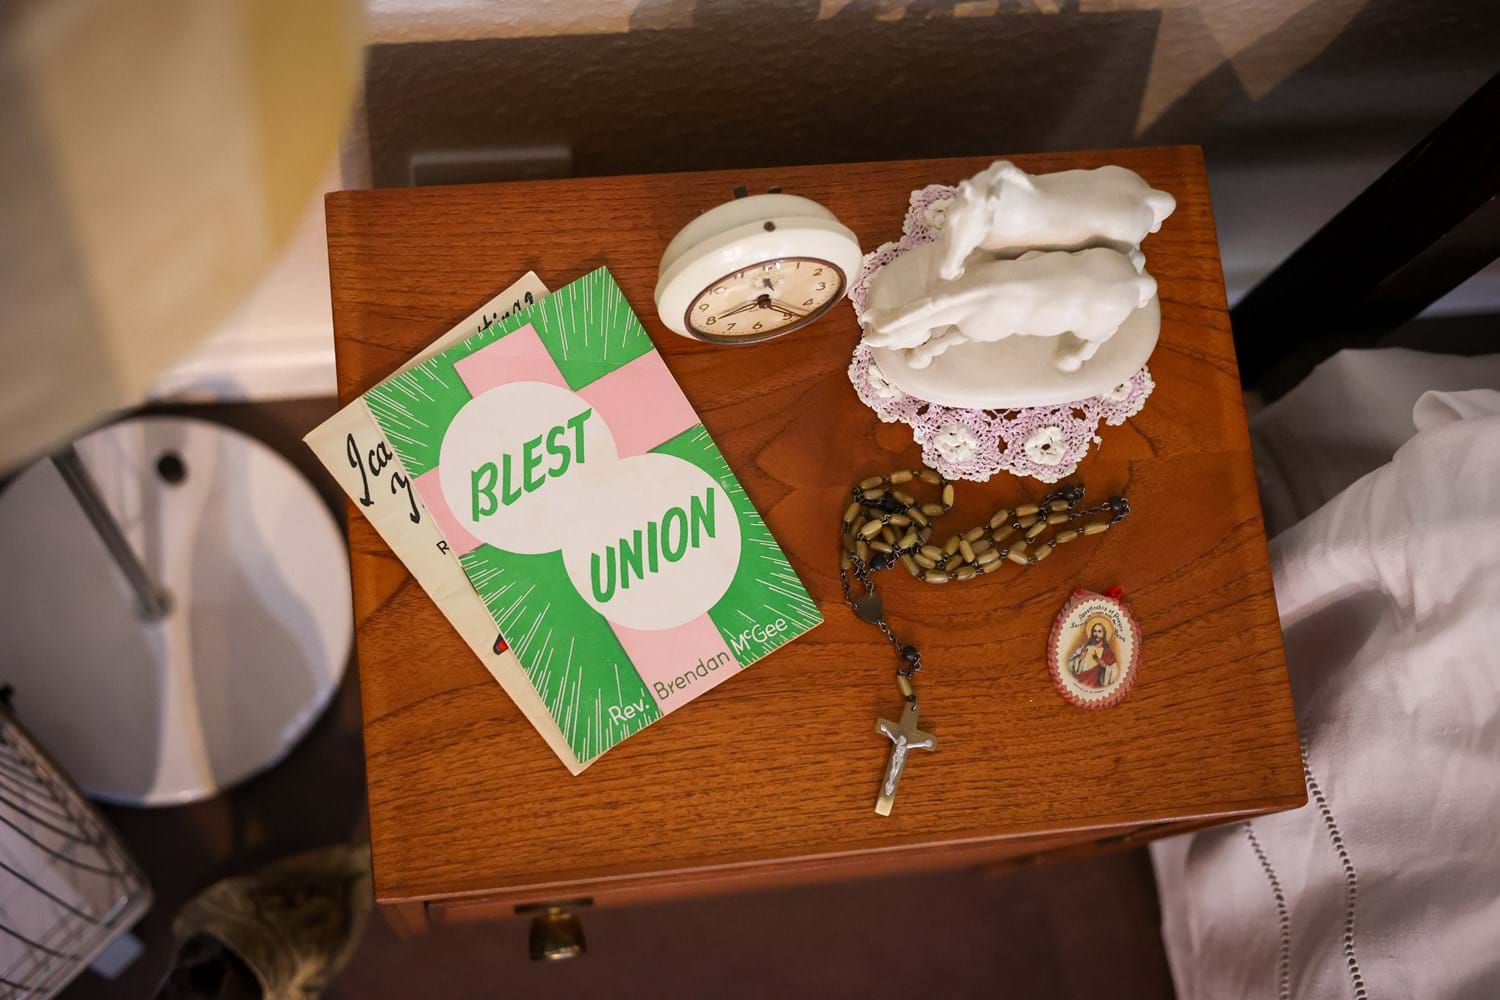 Objects laid out on a wooden bedside table, including praying beads and a green and pink brochure with the words "BLEST UNION"